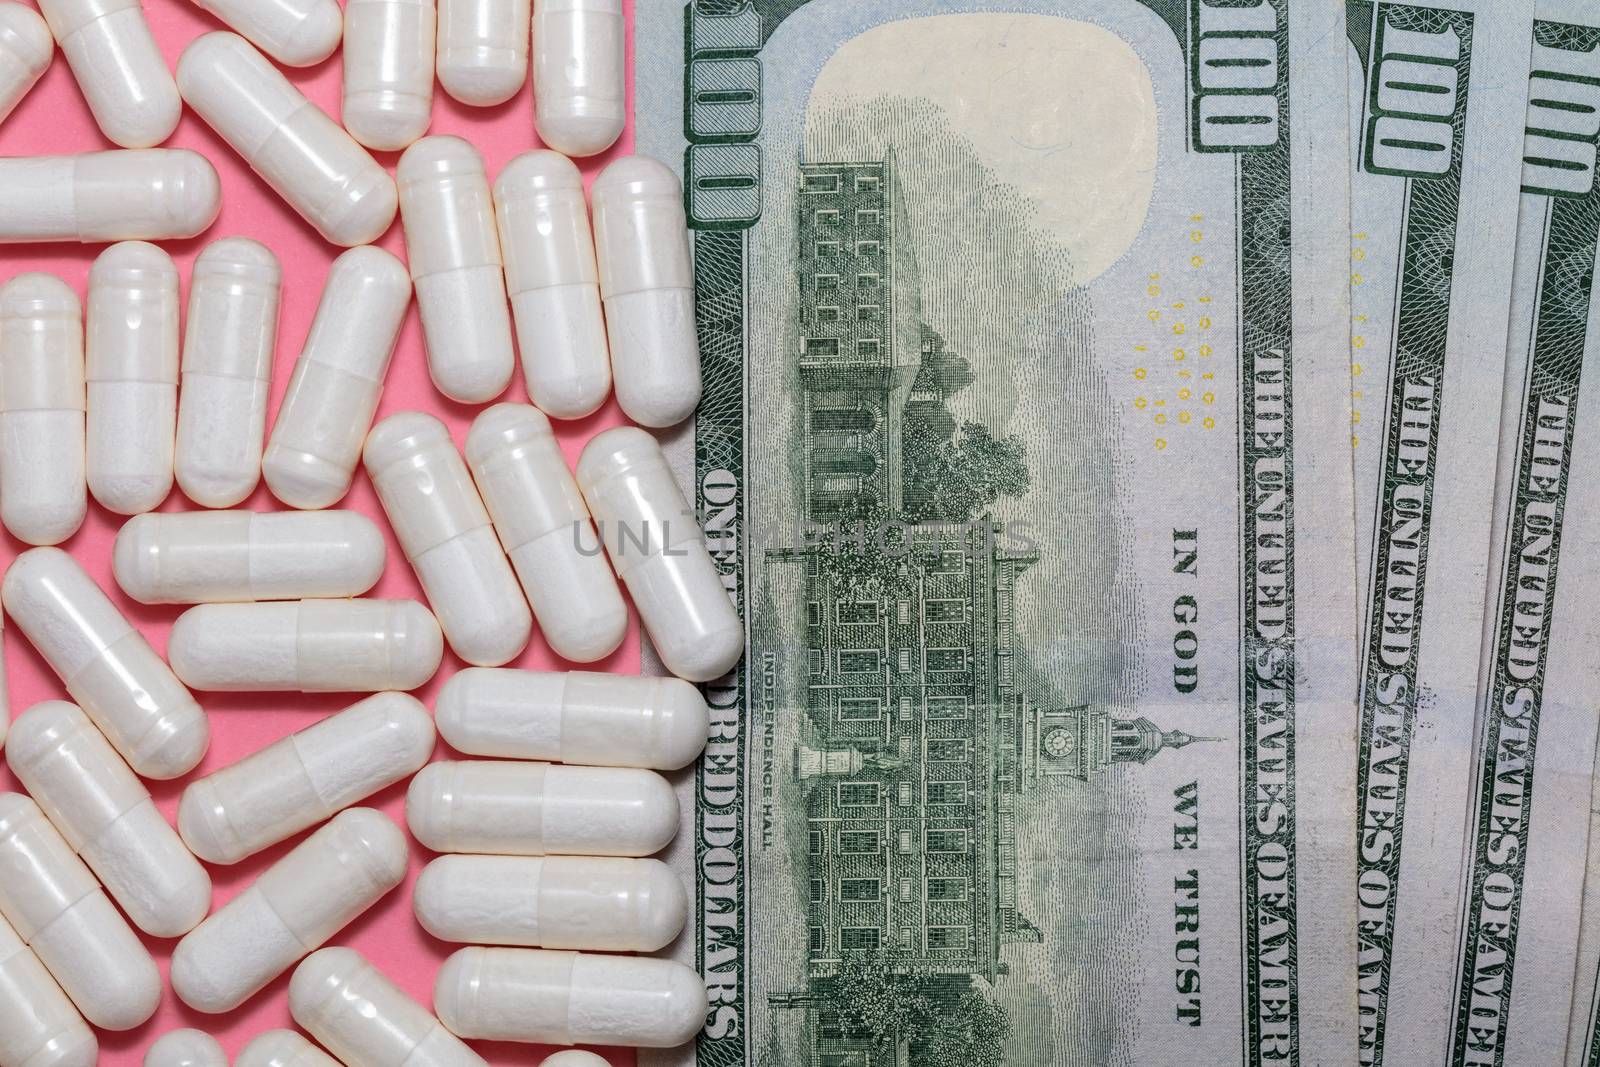 Top close up shot of white pills and a few hundreed dollar bills next to them on pink background. Healthcare, medical, pharmaceutical business, commerce, shopping concepts. New normal concept.